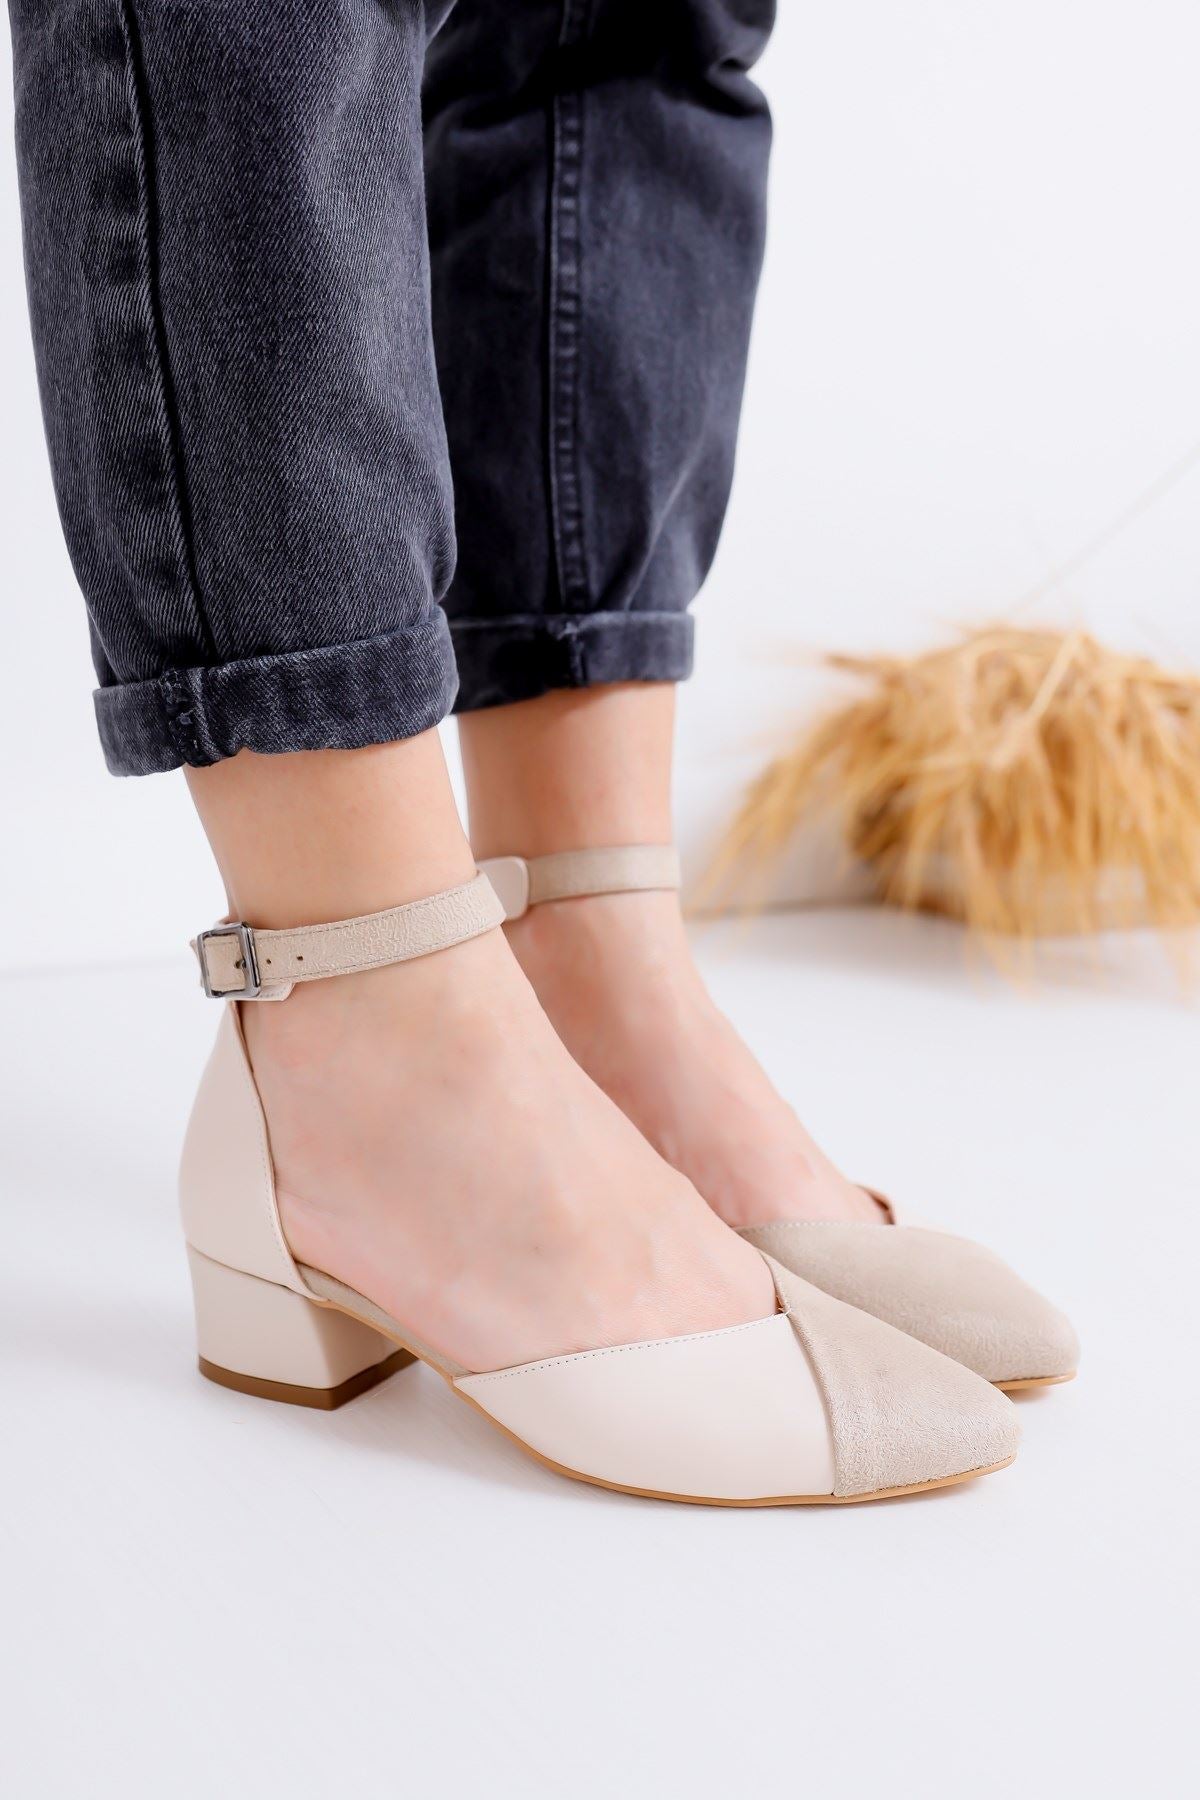 Women's Holly Heeled Skin-Suede Shoes - STREETMODE ™